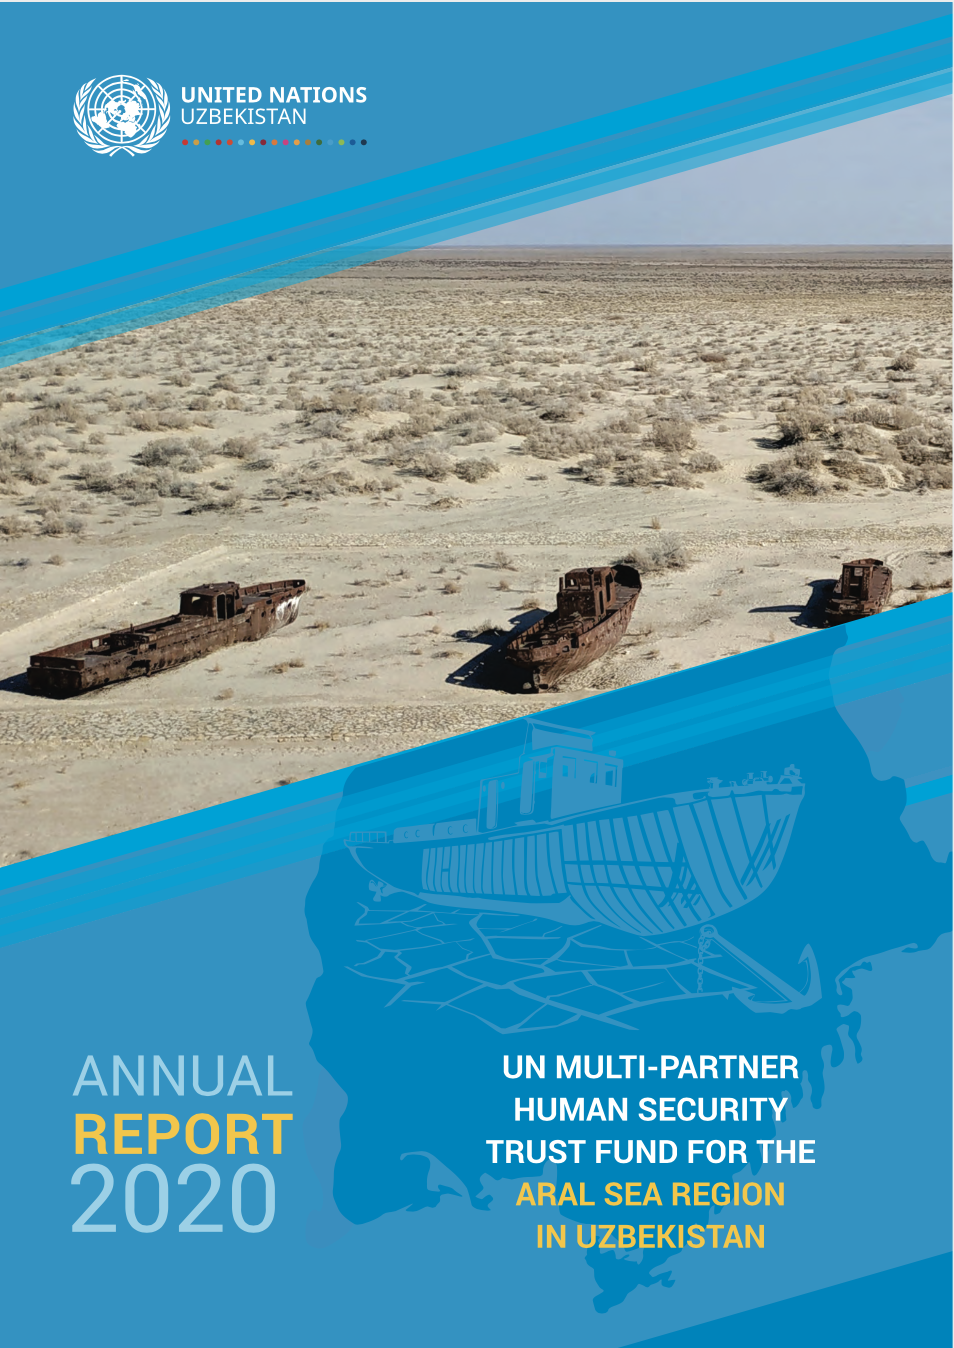 Annual Fund-level report of the UN Multi-Partner Human Security Trust Fund for the Aral Sea region in Uzbekistan, 2020